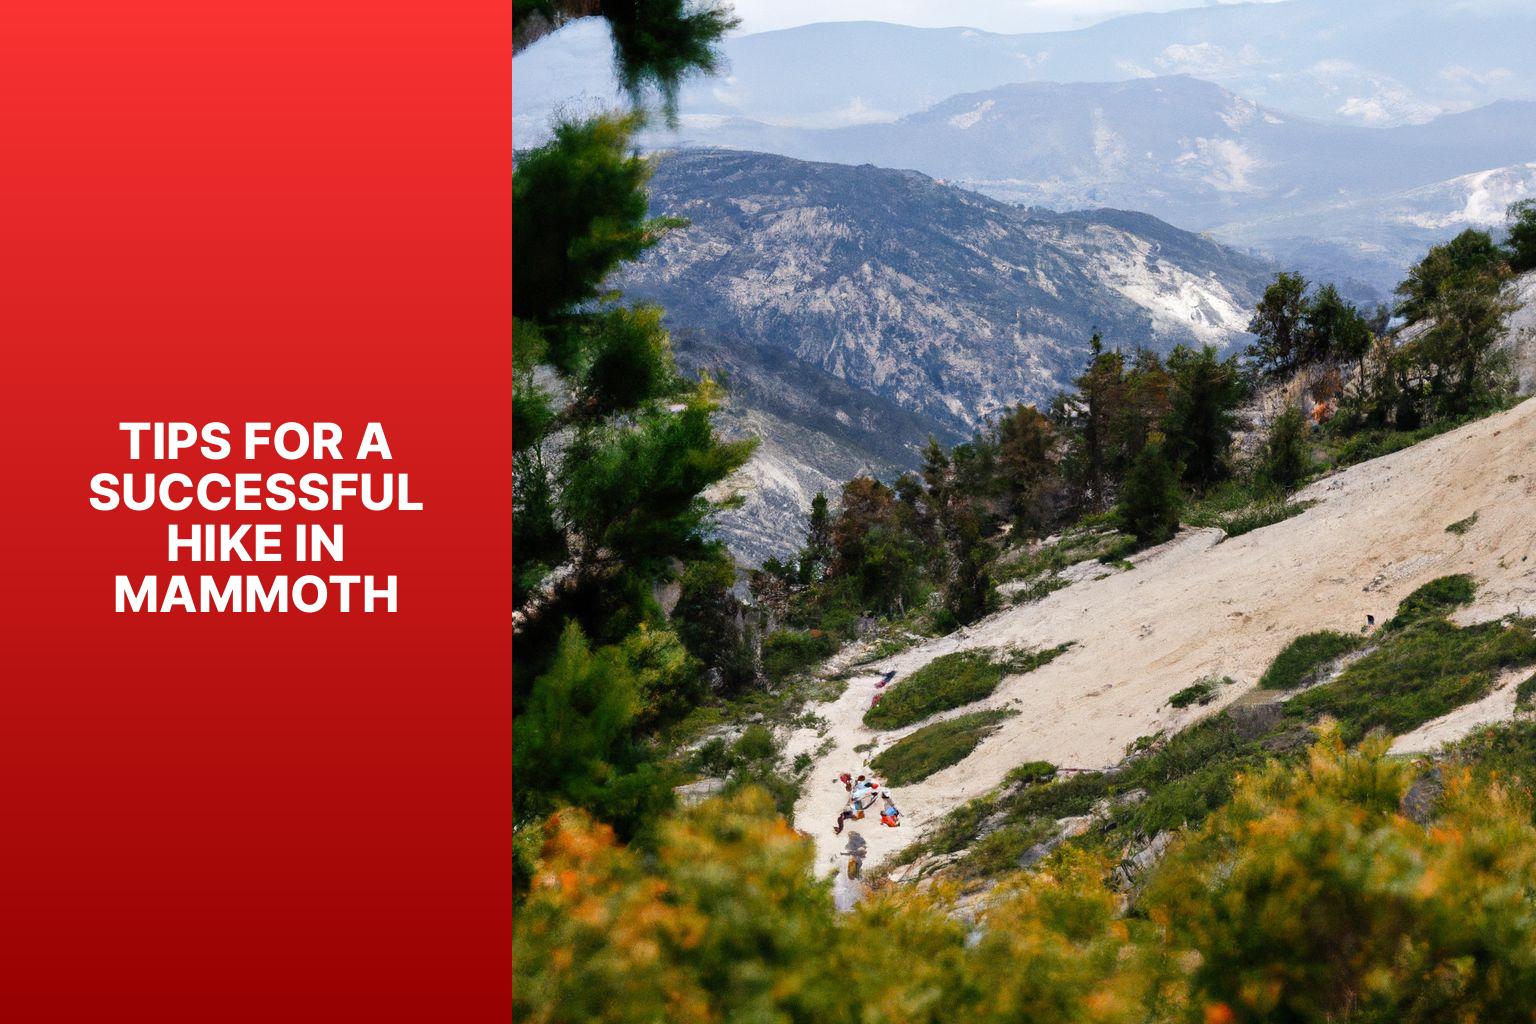 Tips for a Successful Hike in Mammoth - Hikes in Mammoth 